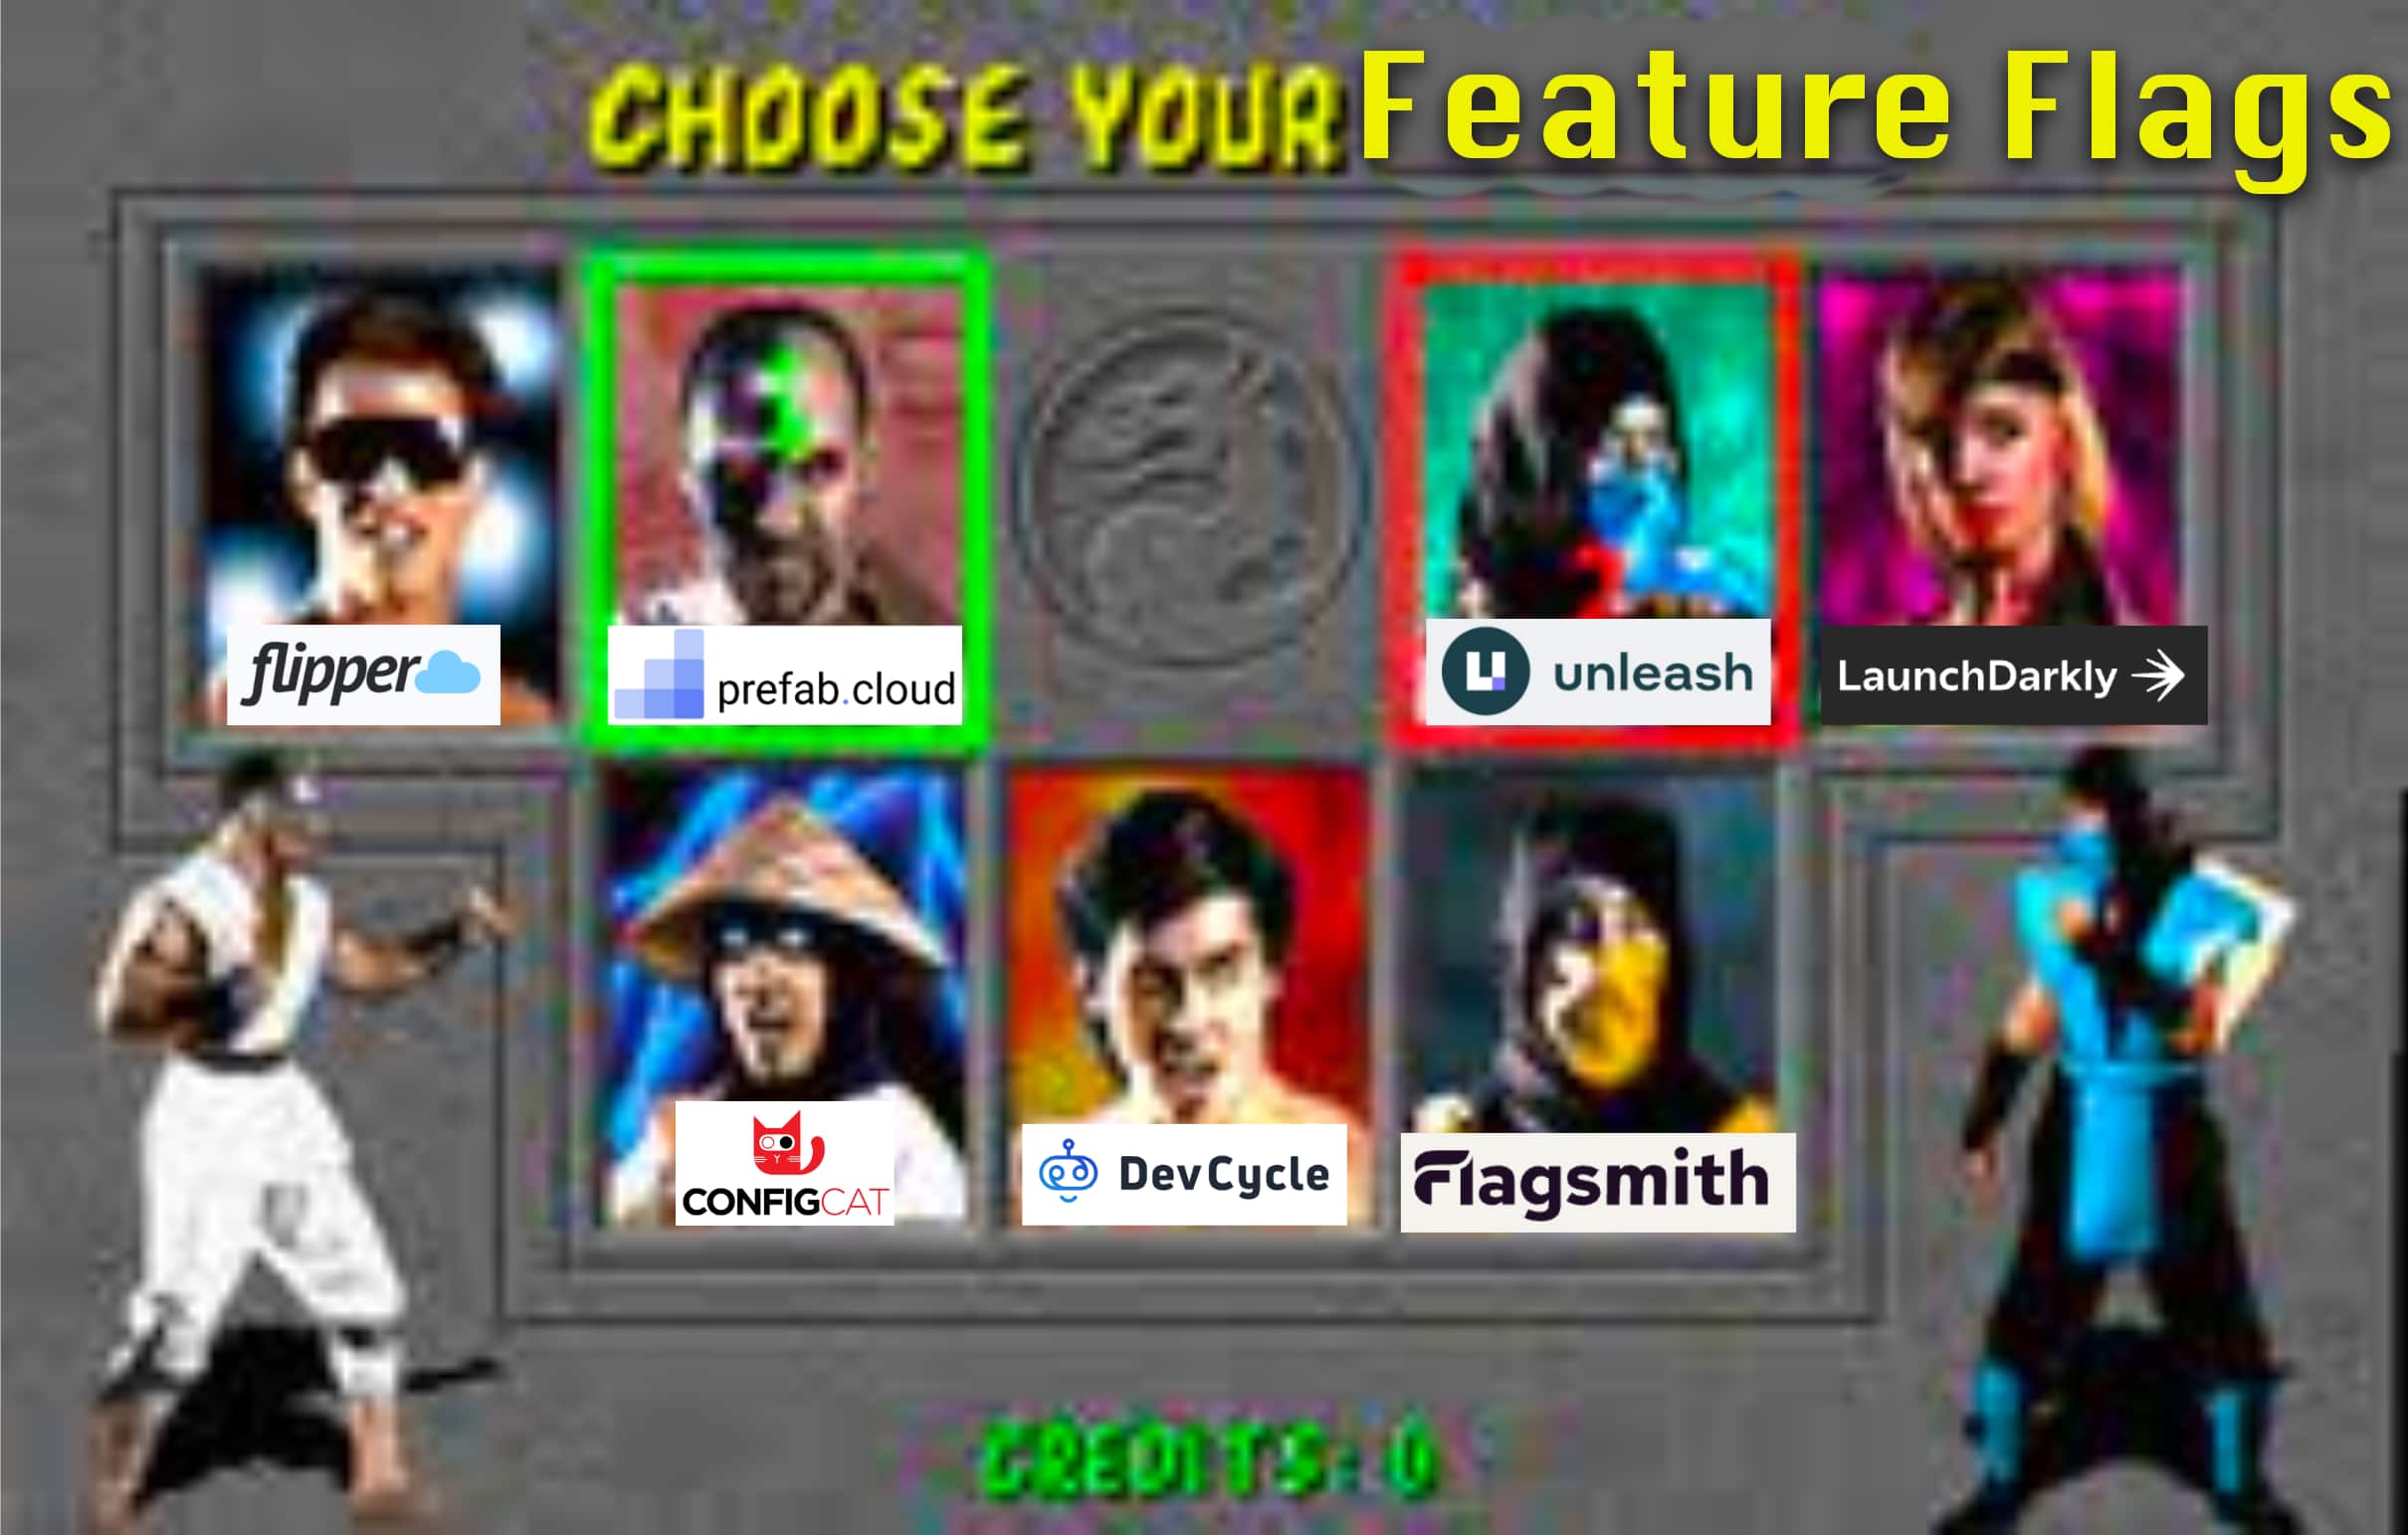 Choose your feature flags